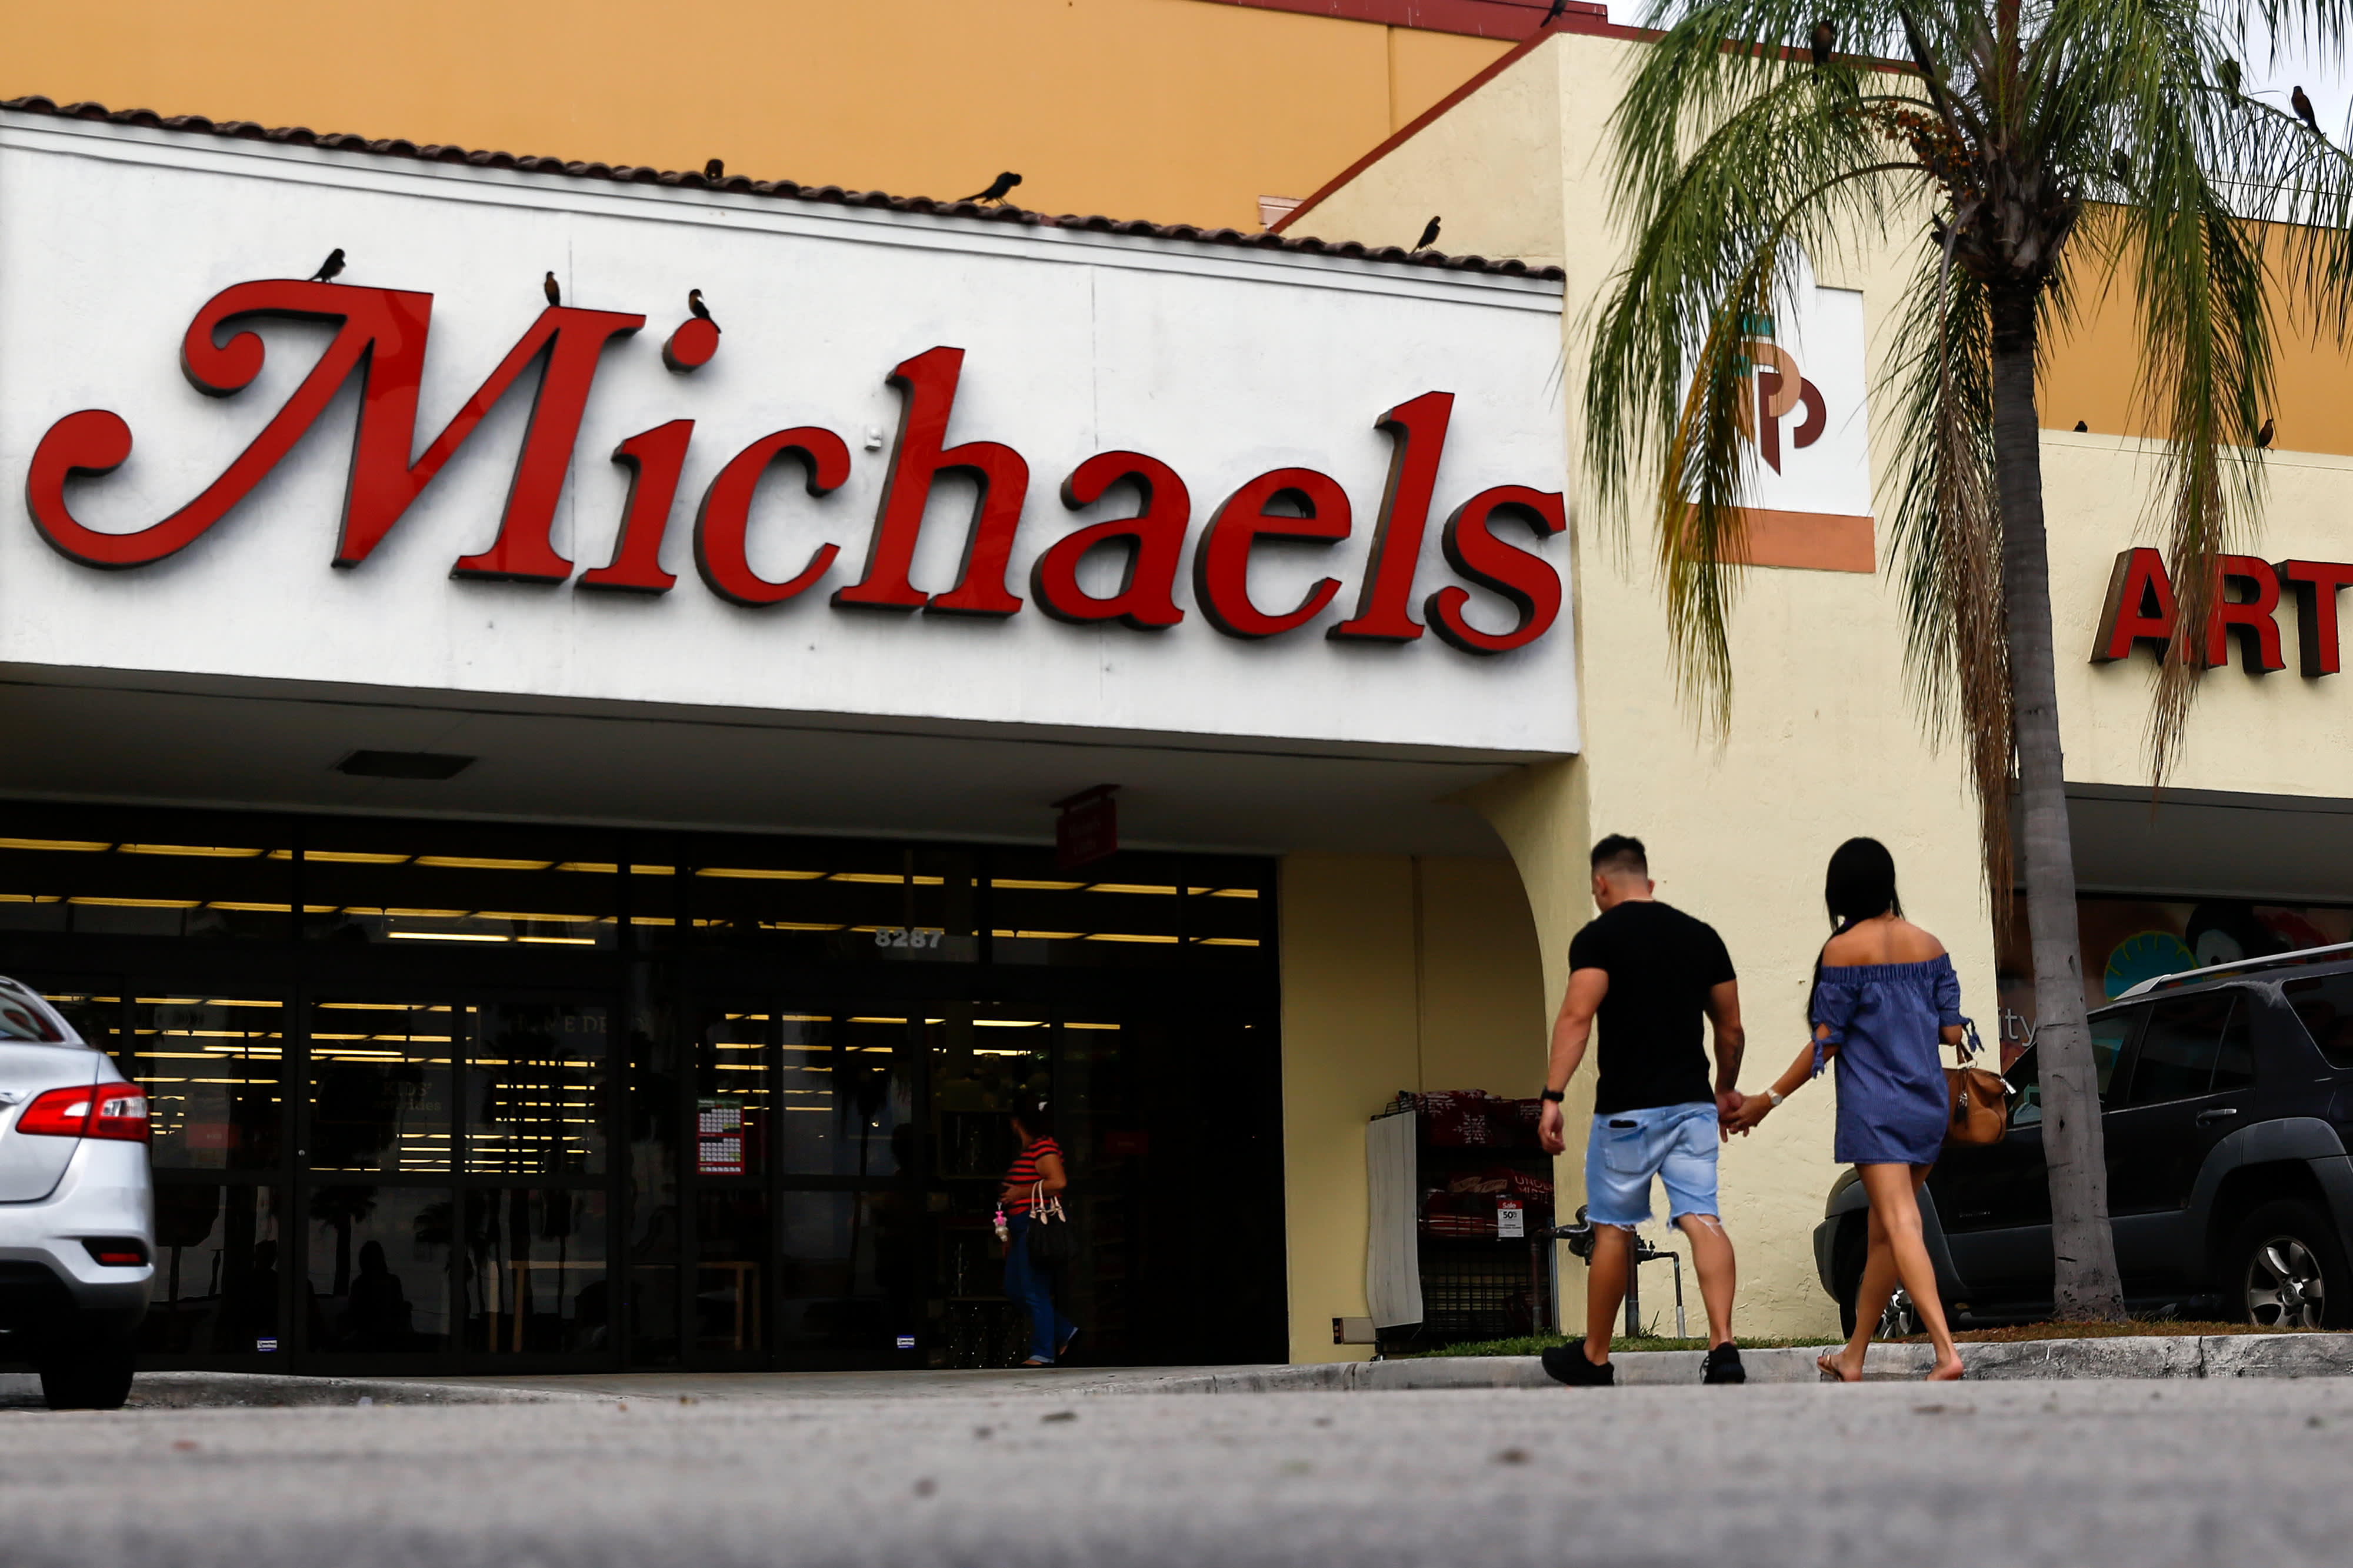 Michaels expands kids' section to win sales Toys R Us left behind